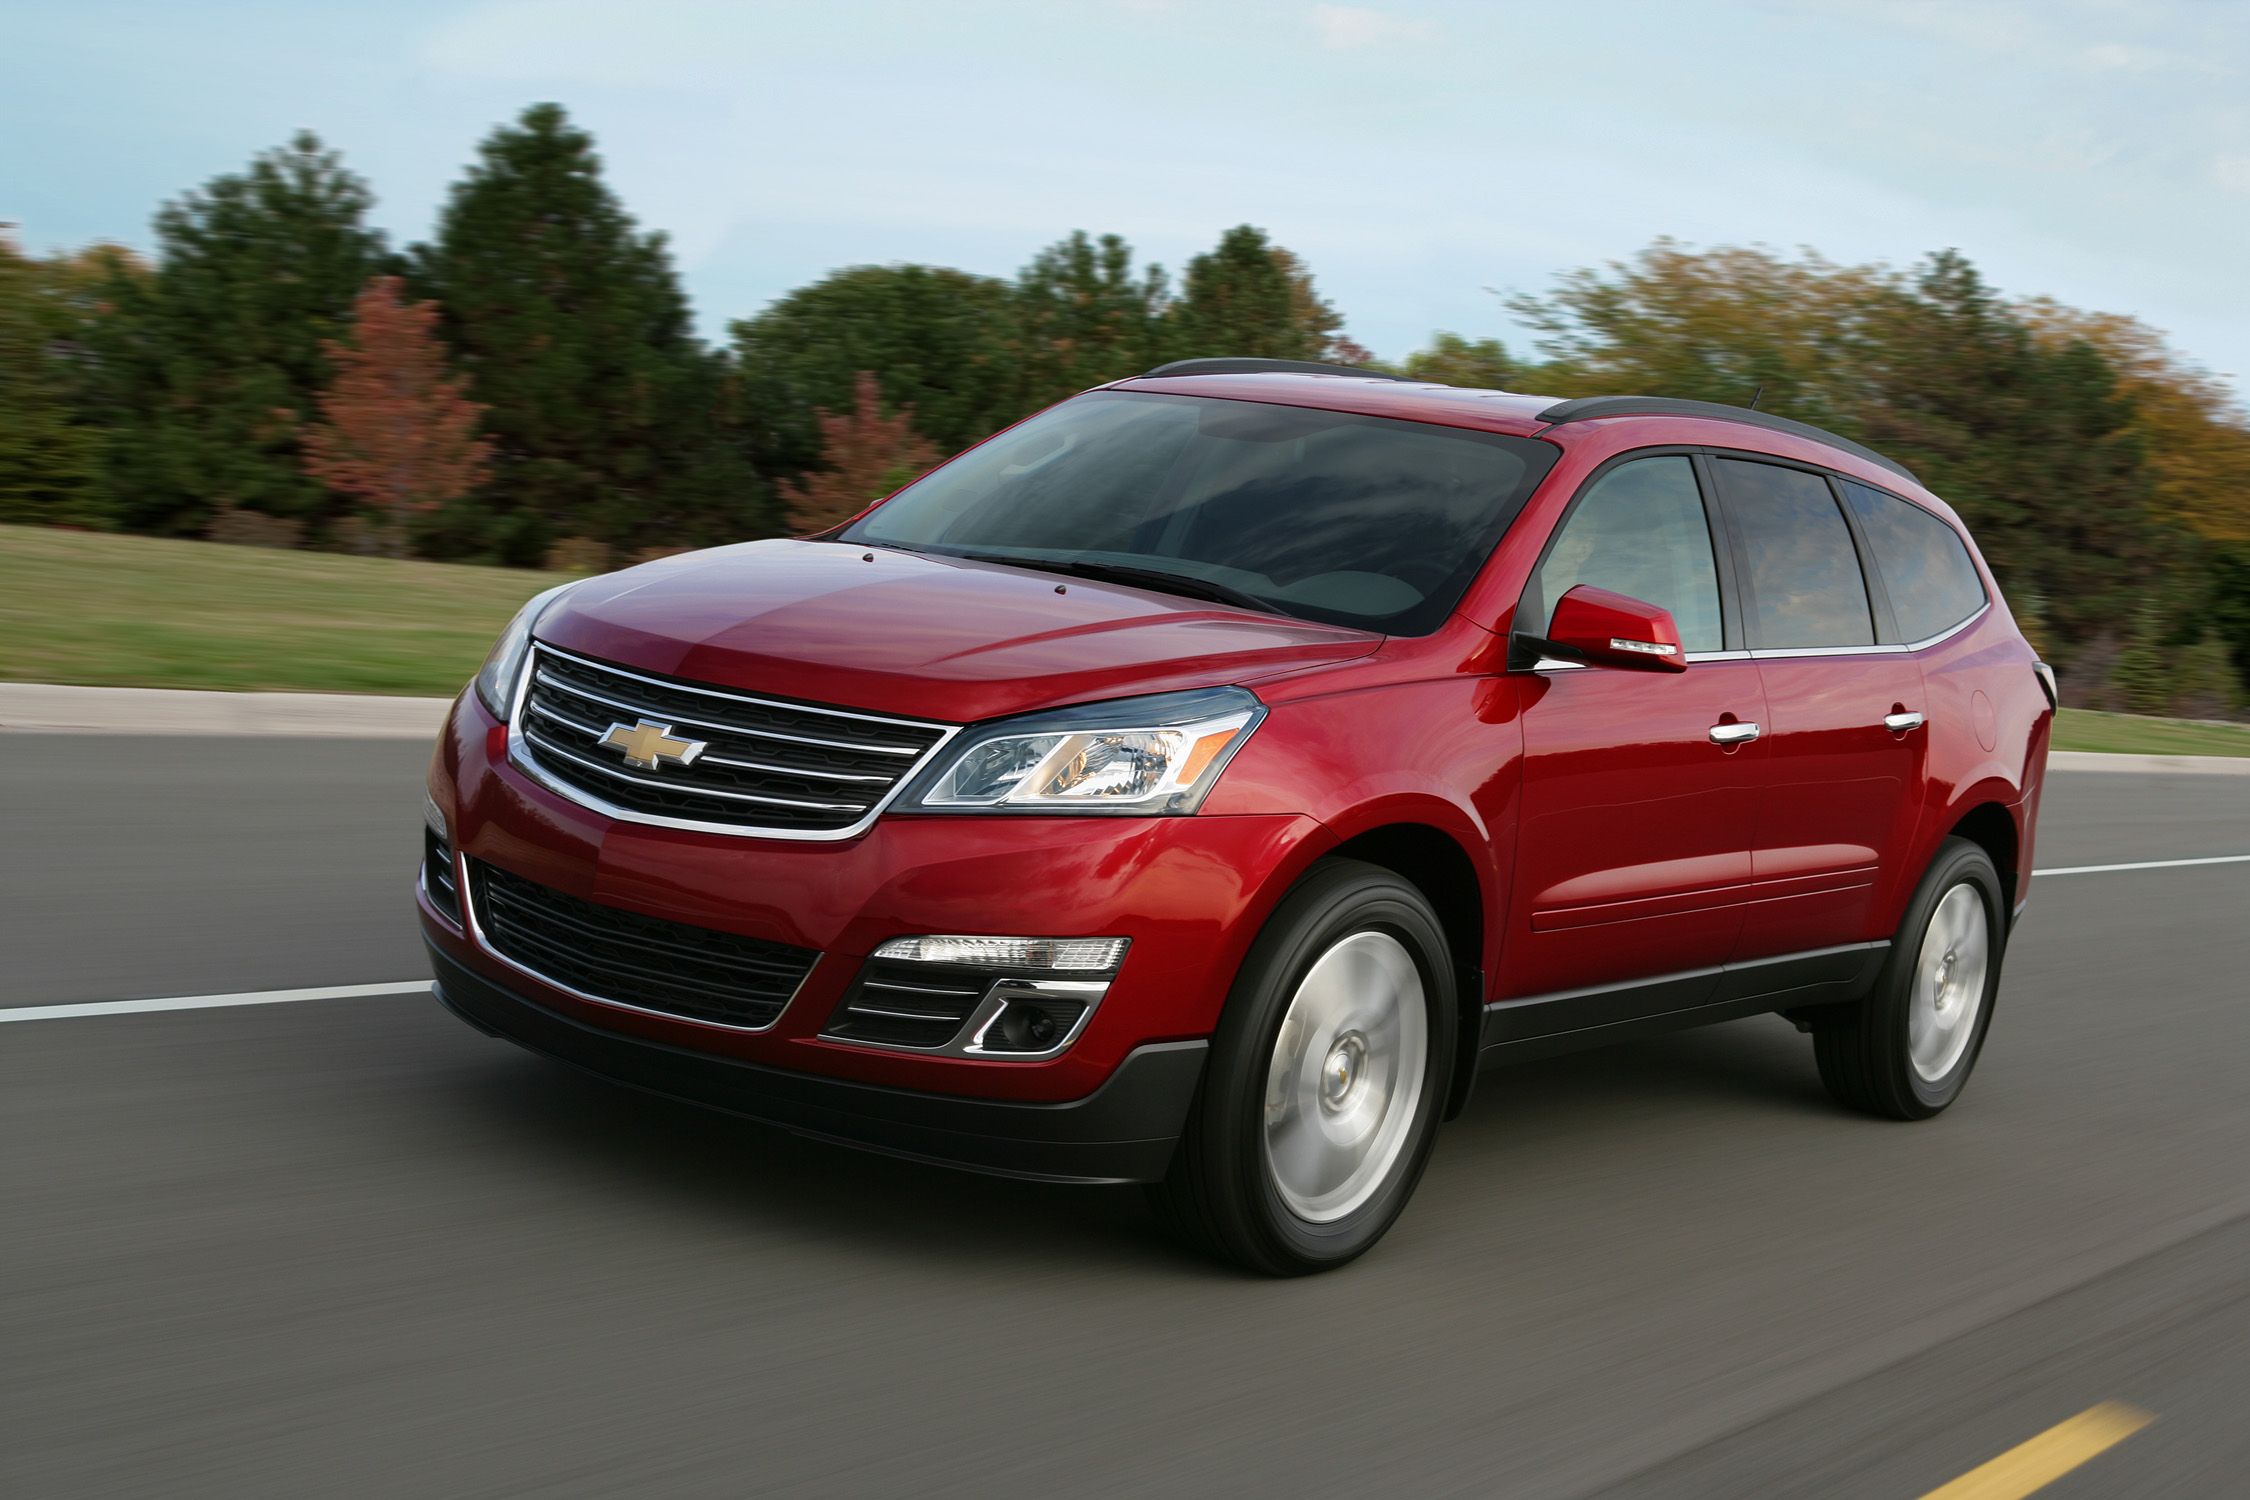 2017 Chevrolet Traverse Review, Pricing, and Specs